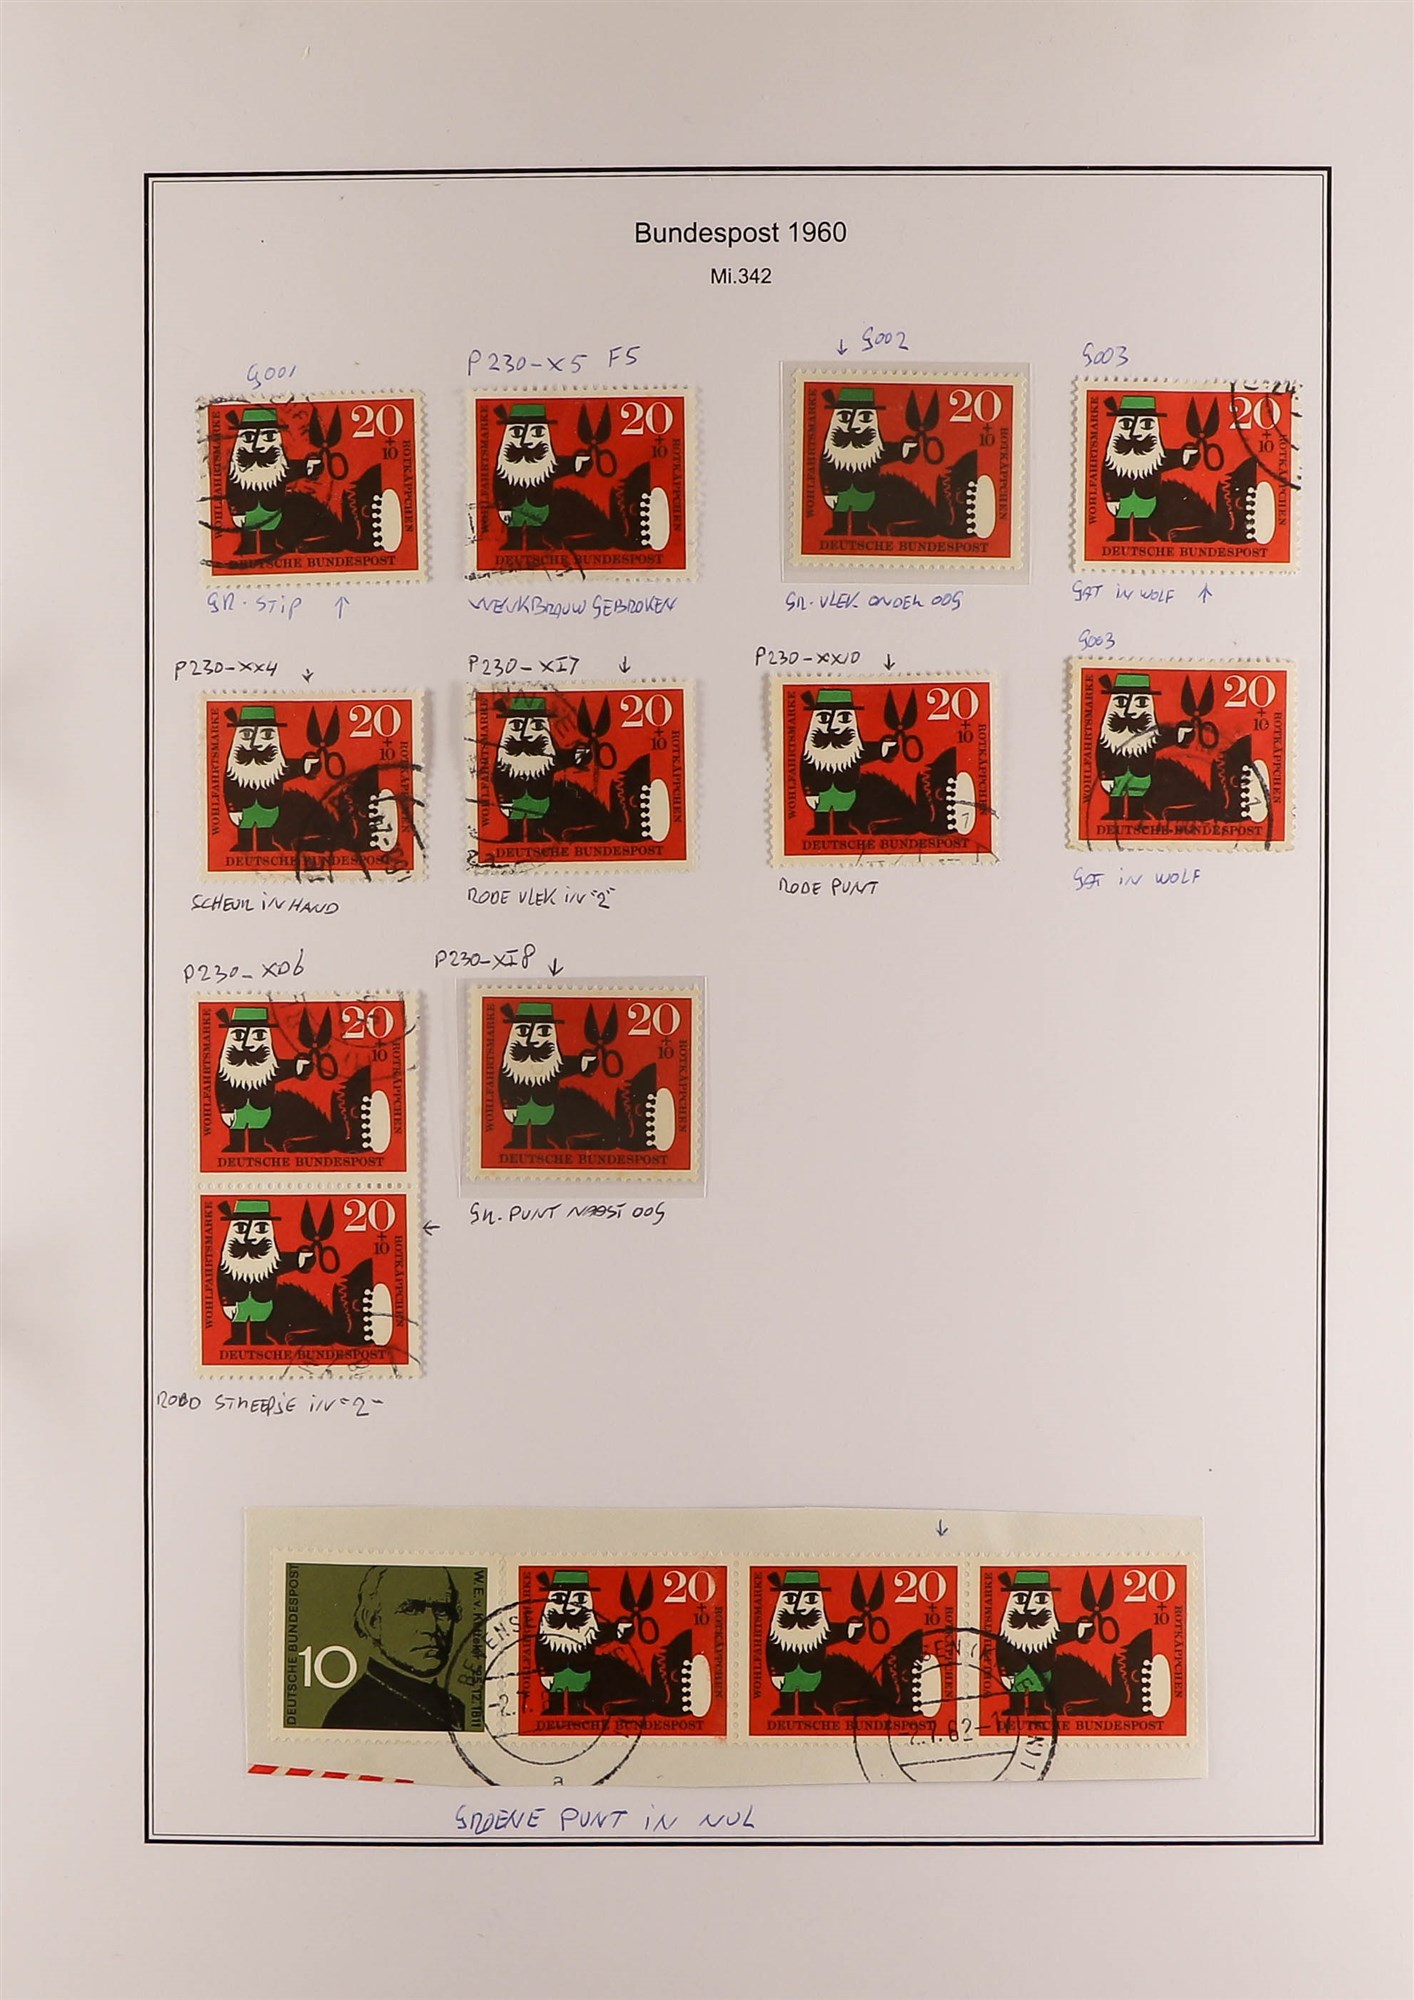 GERMANY WEST 1960 - 1964 SPECIALIZED COLLECTION of 600+ mint / never hinged mint and used stamps, - Image 2 of 13